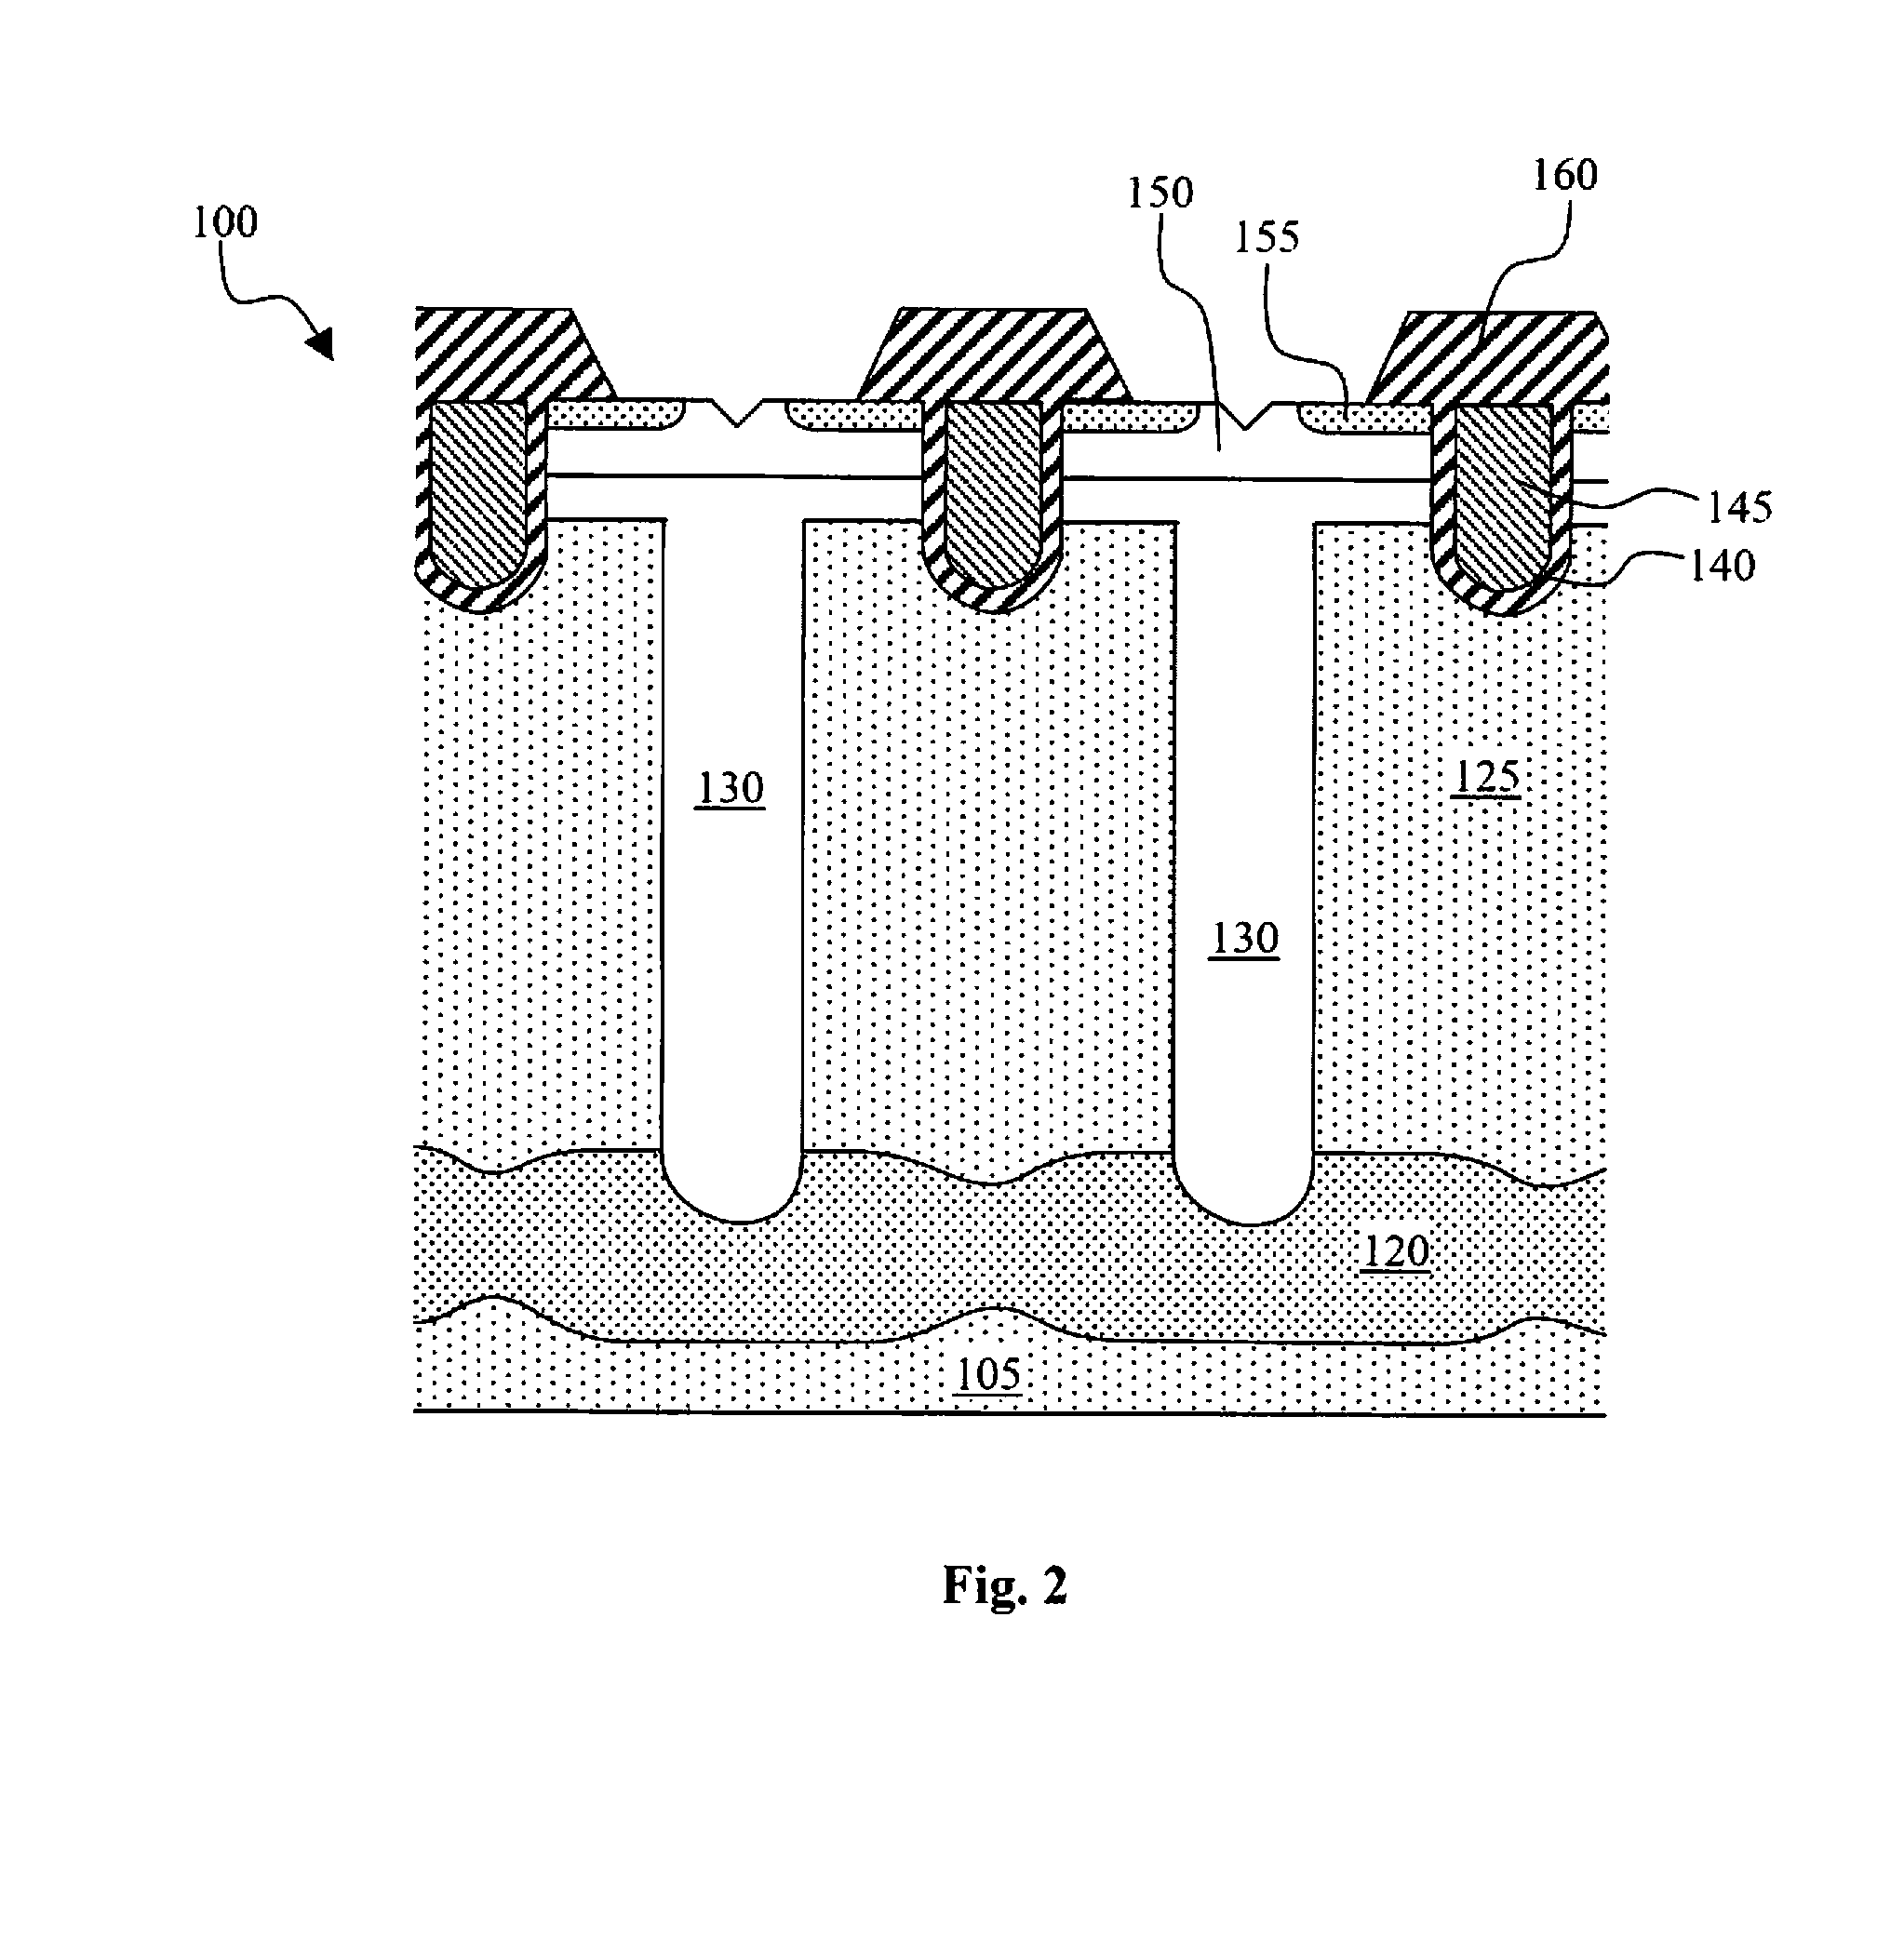 Configurations and methods for manufacturing charged balanced devices